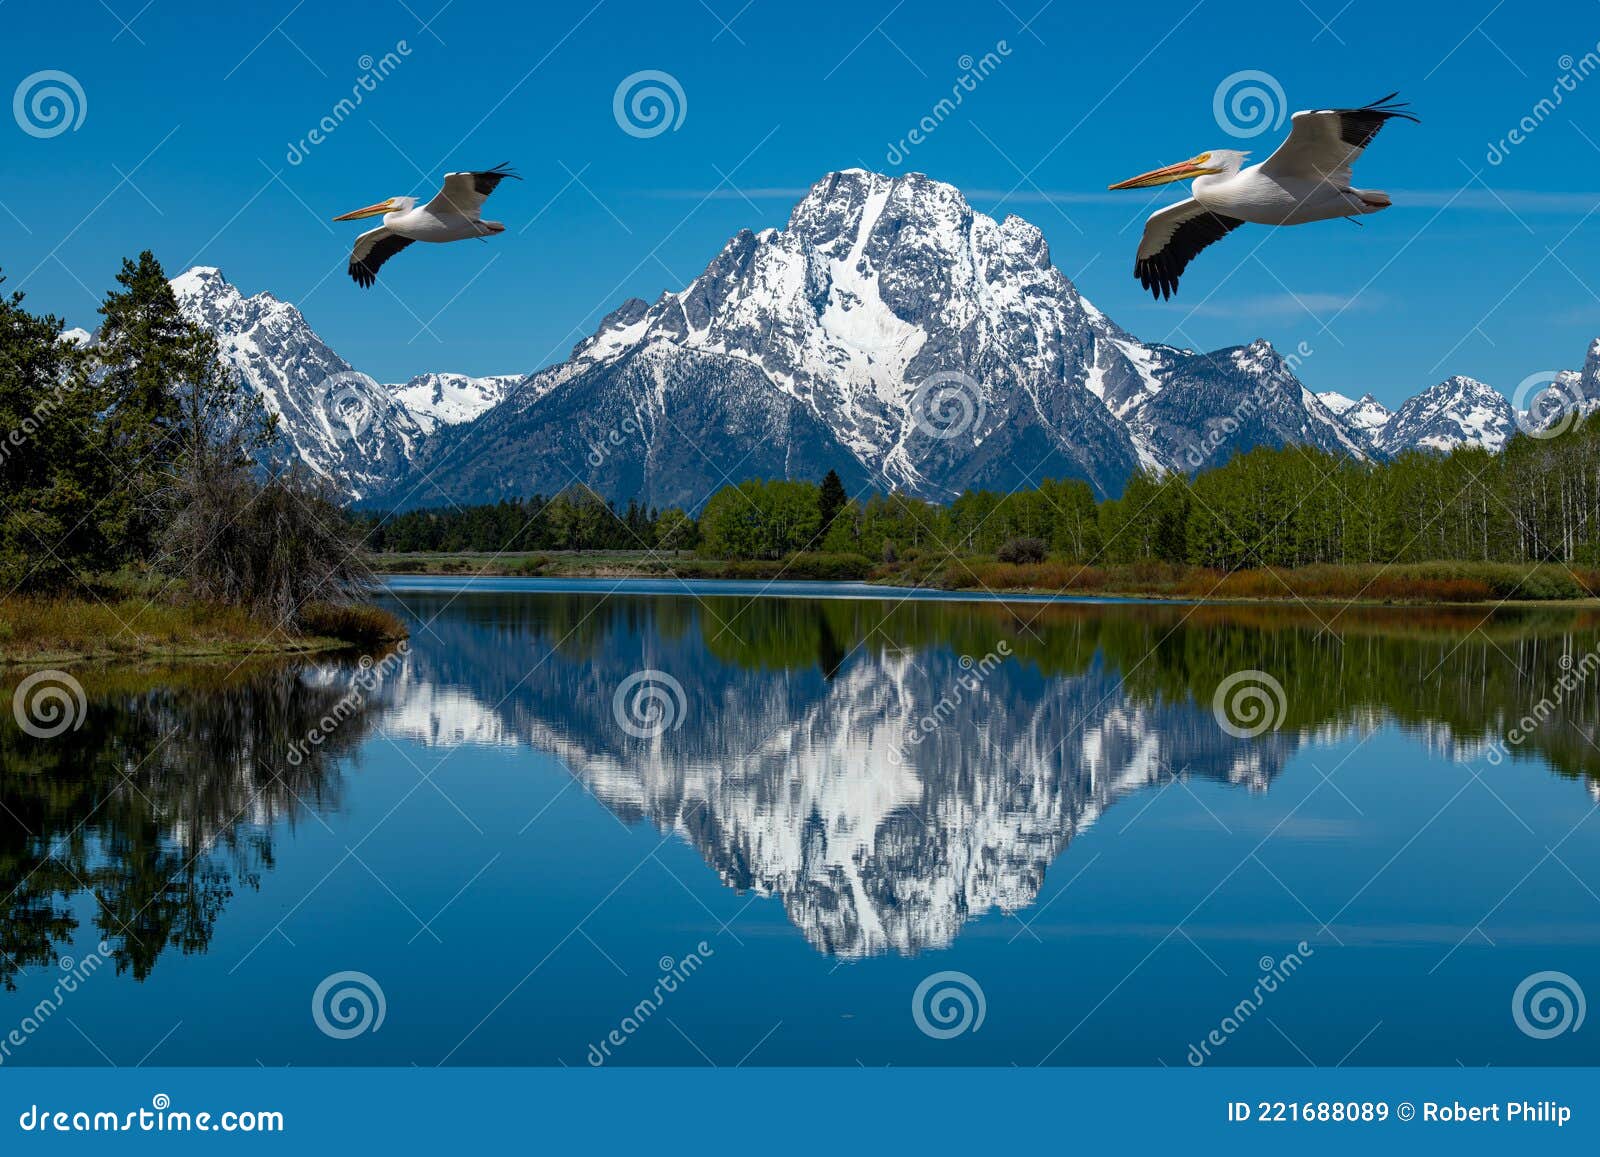 white pelicans fly over the snake river with the distant reflection of mt. moran at oxbow bend